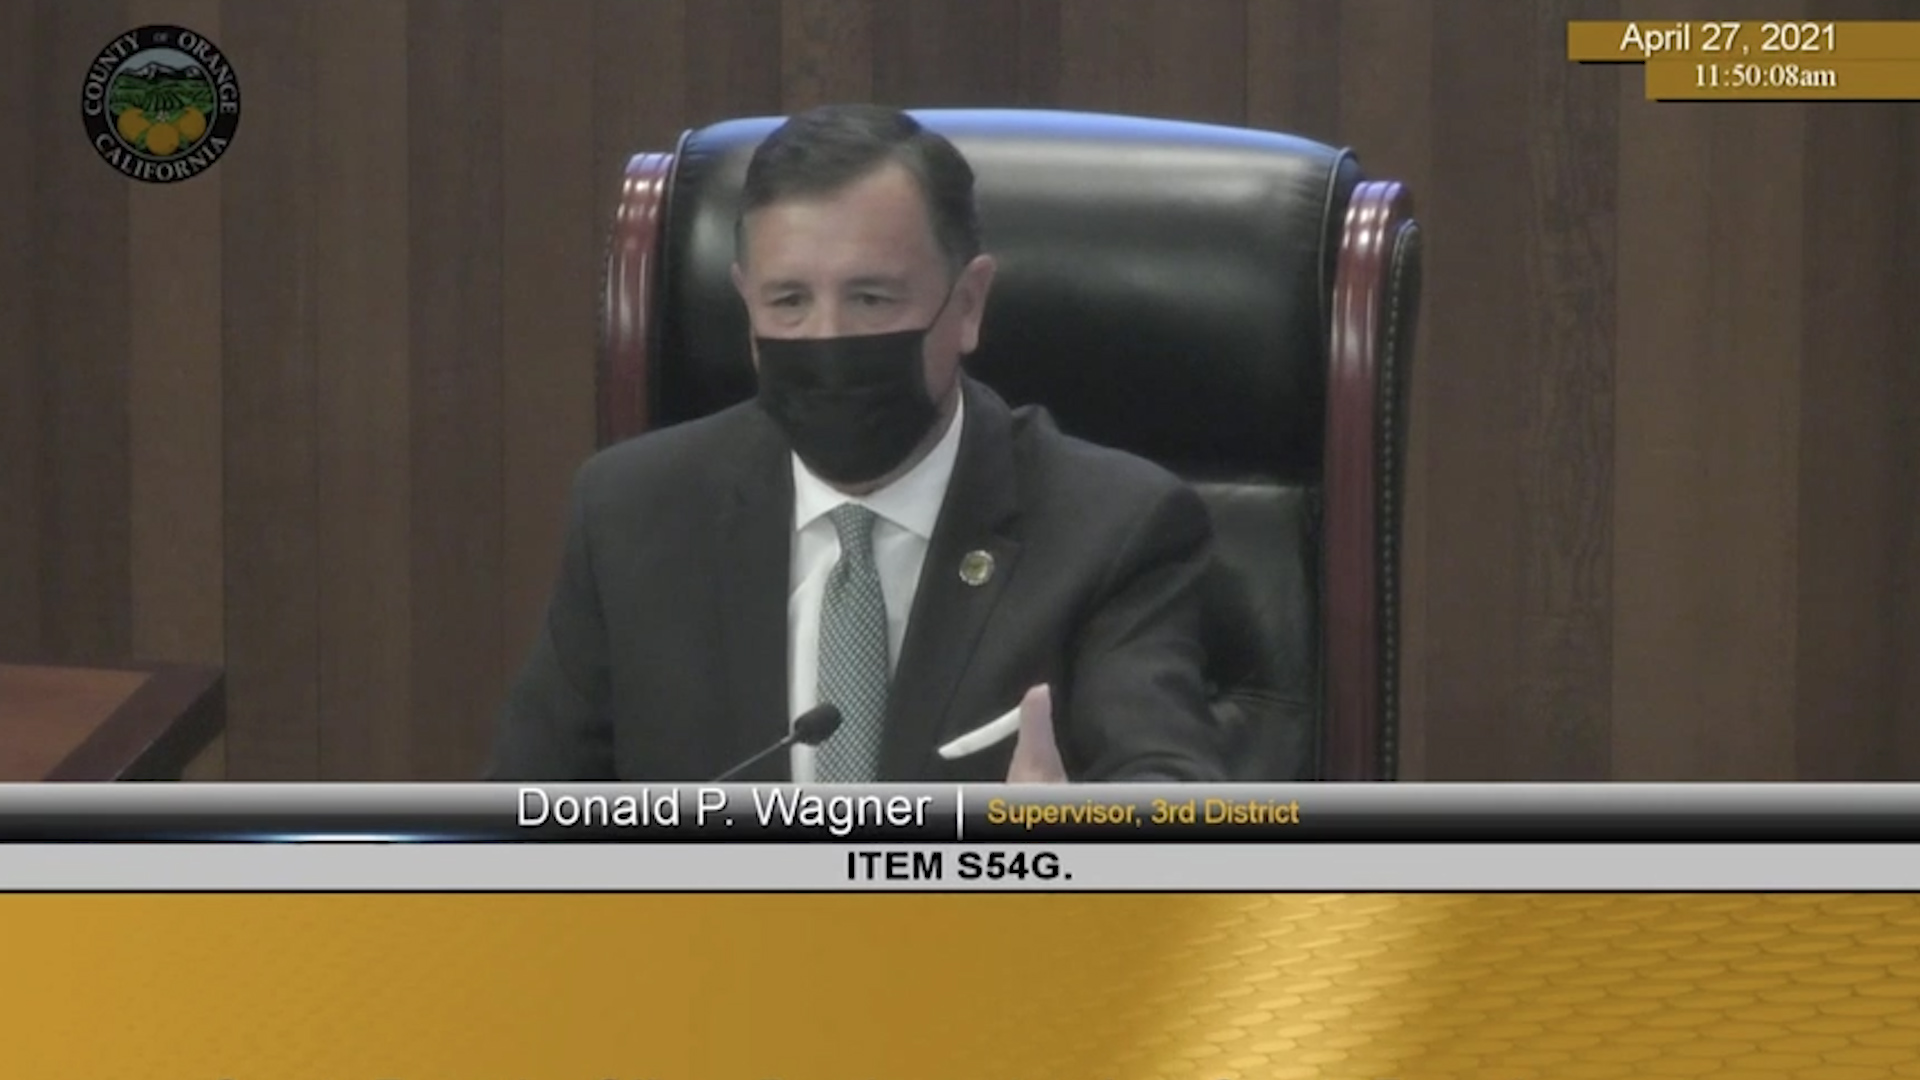 Don Wagner Gop California Lawmaker Asked If Vaccines Had Tracking Devices The Washington Post